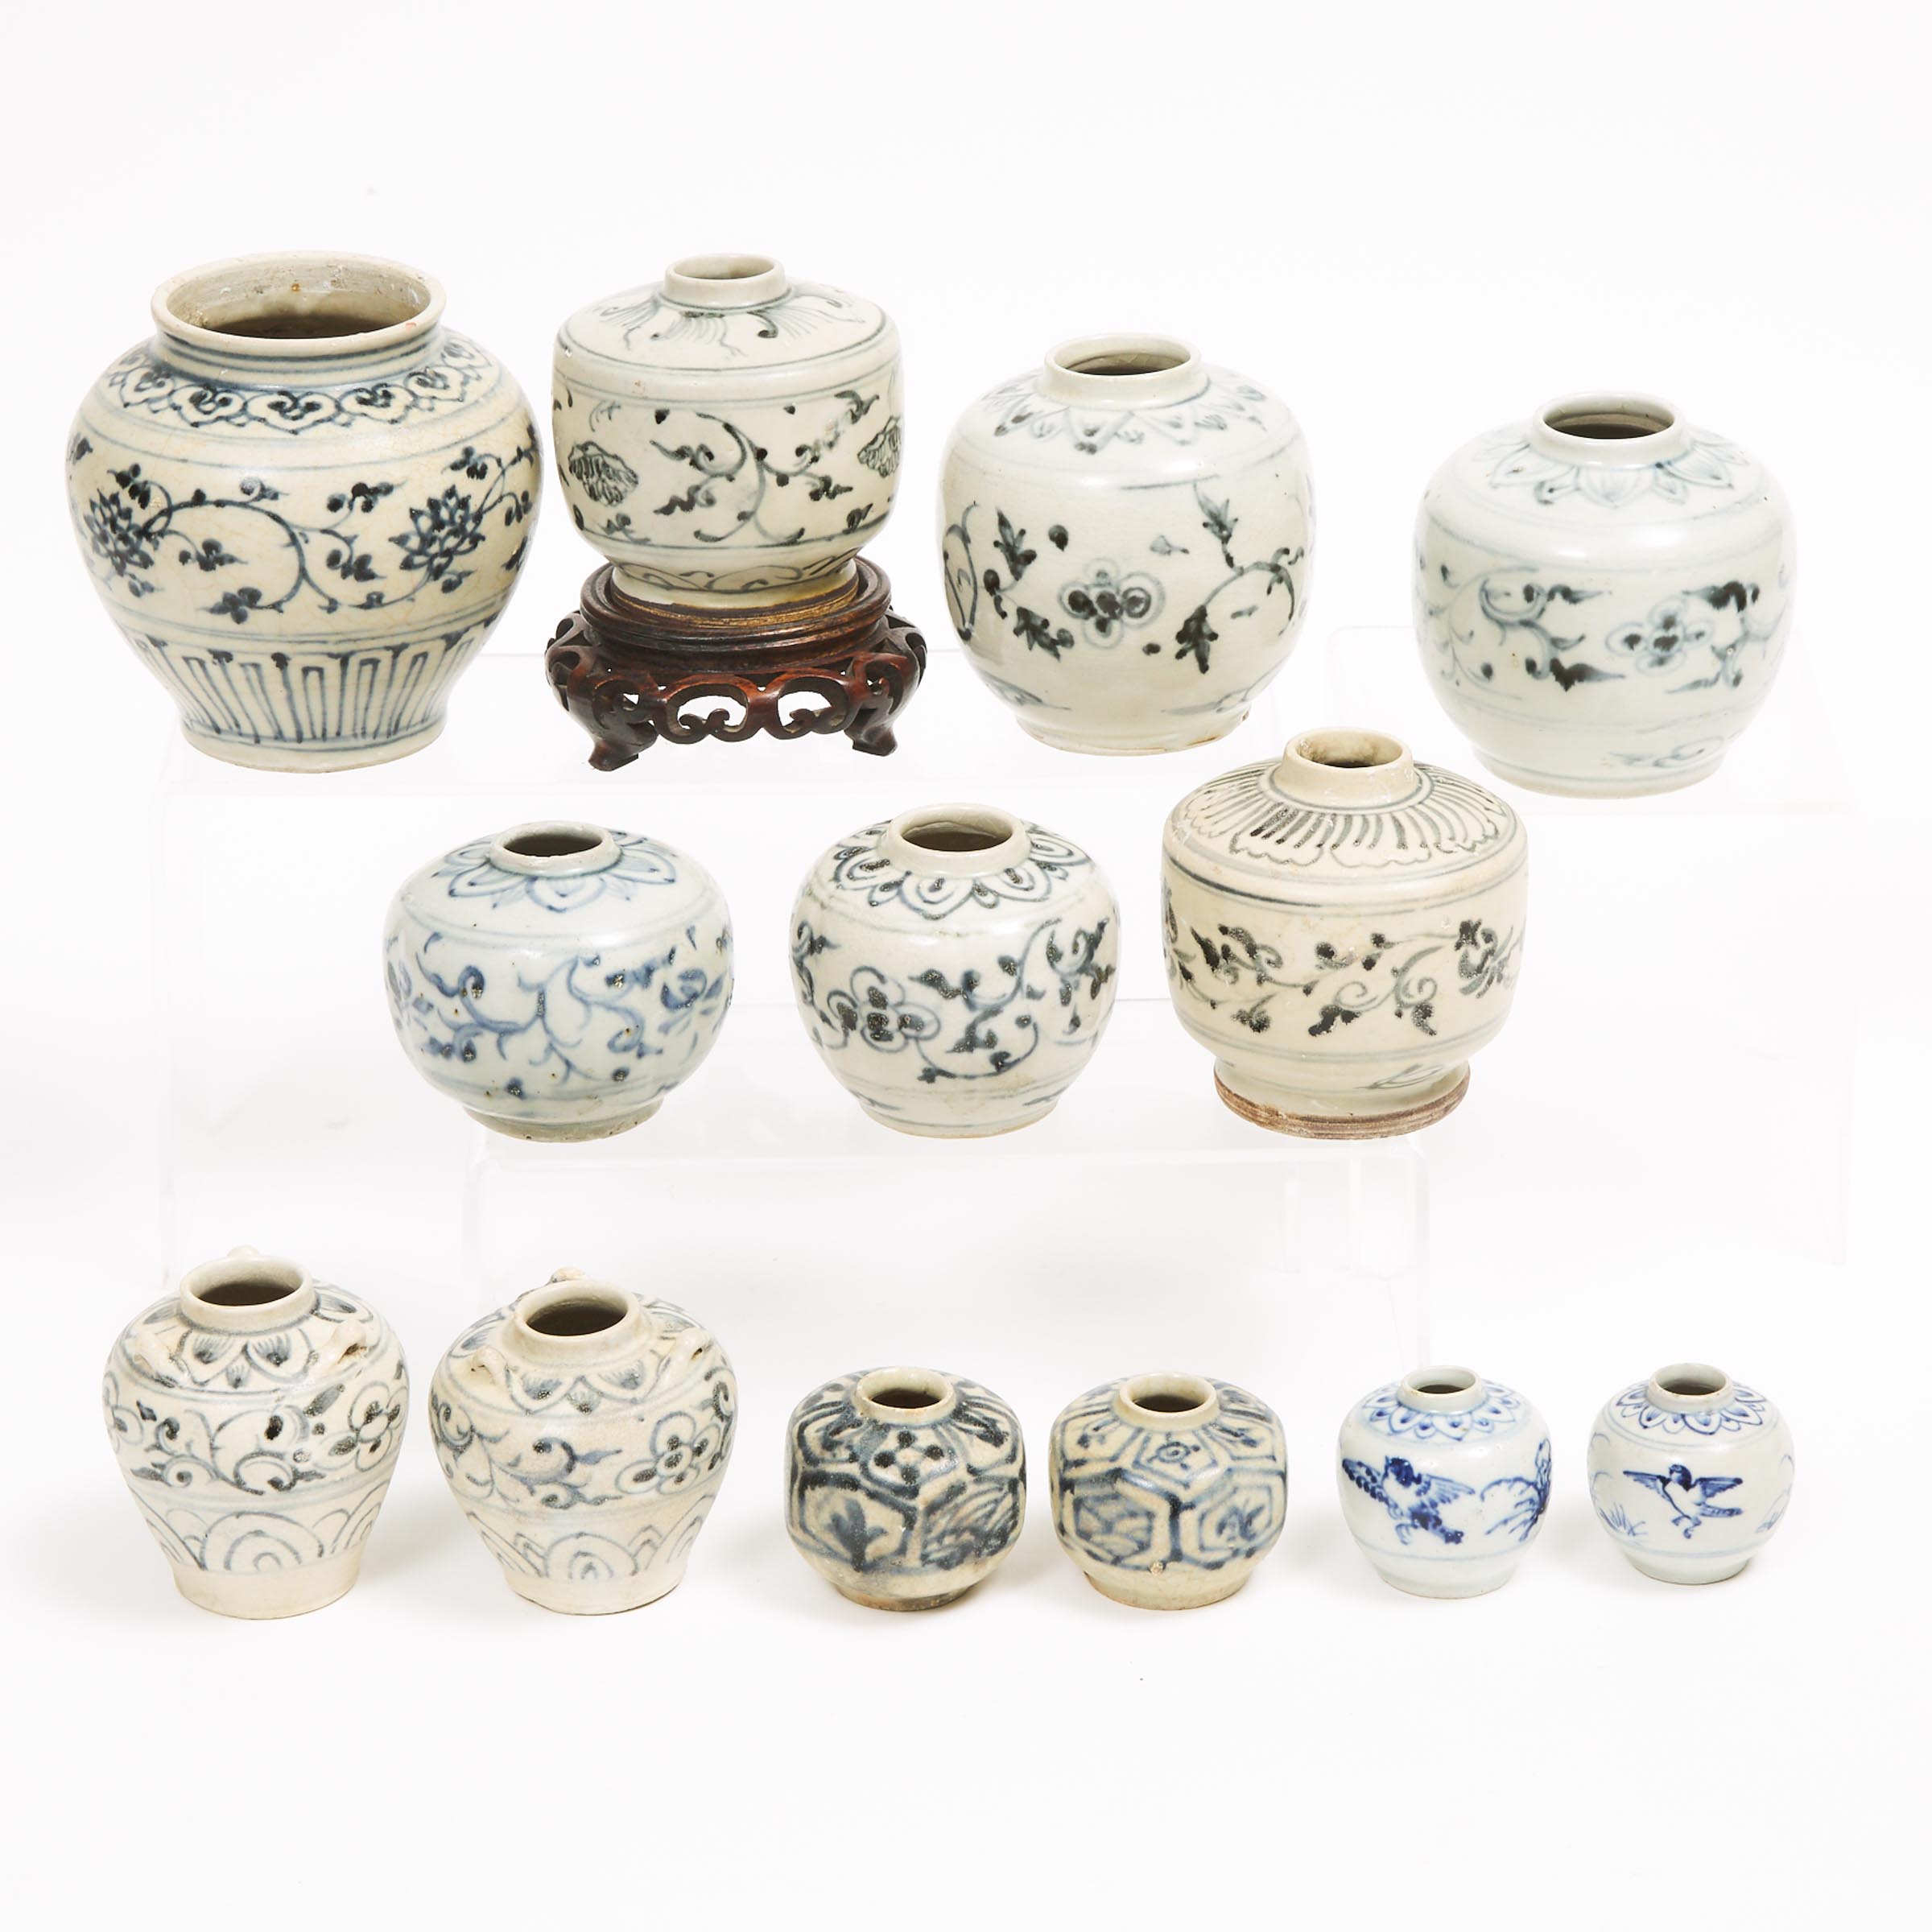 A Group of Thirteen 'Hoi An Hoard' Vietnamese Blue and White Jarlets, 15th Century